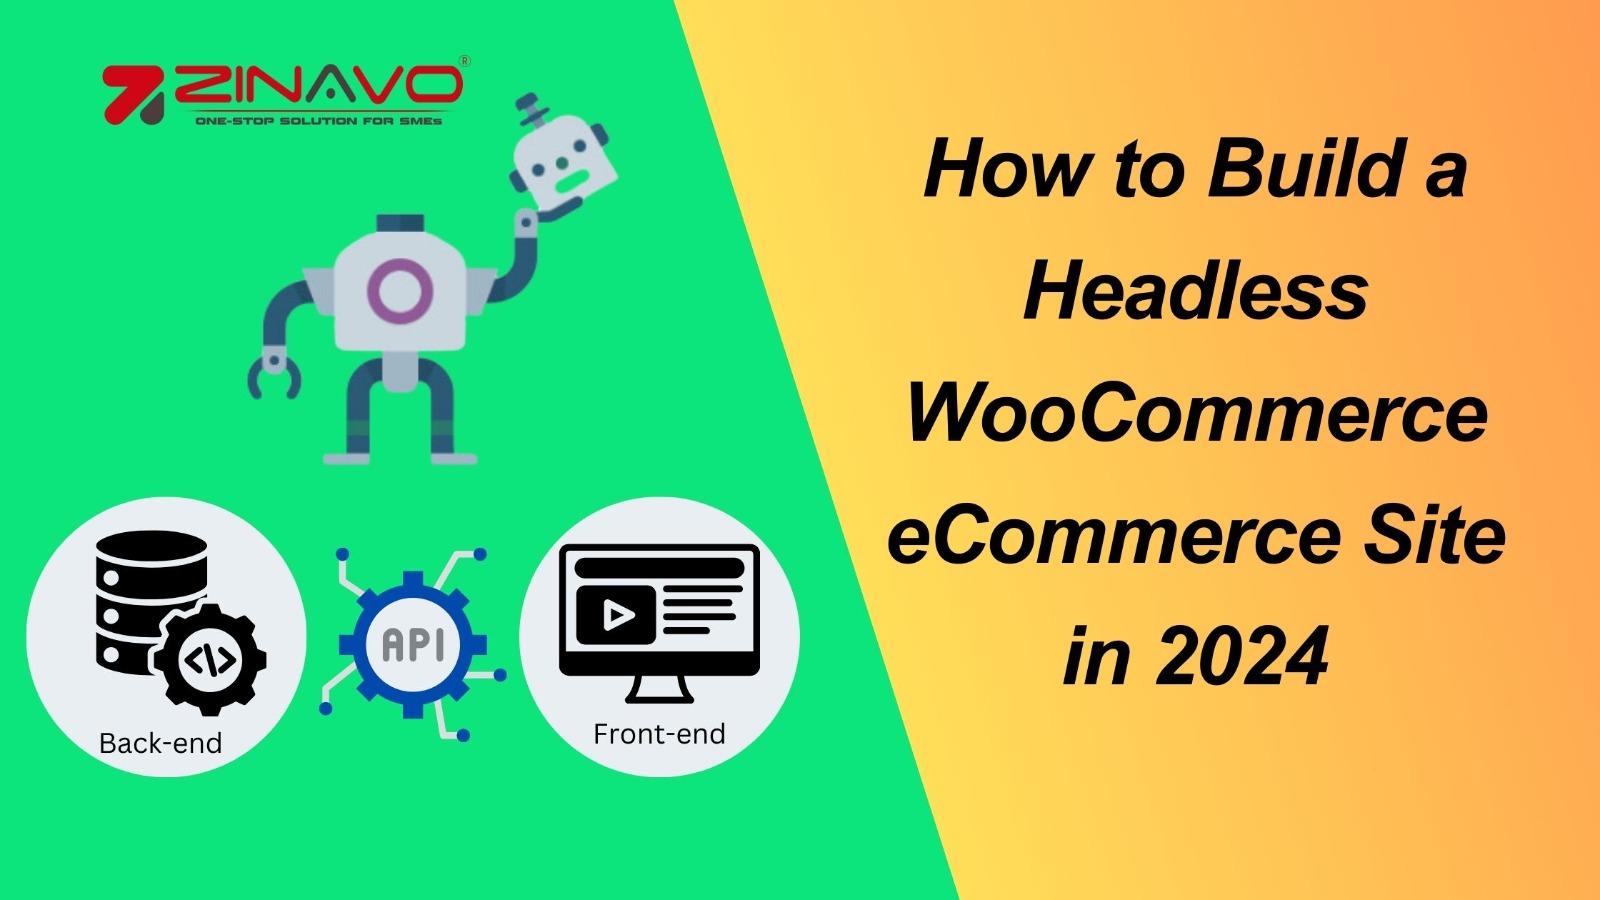 How to Build a Headless WooCommerce eCommerce Site in 2024